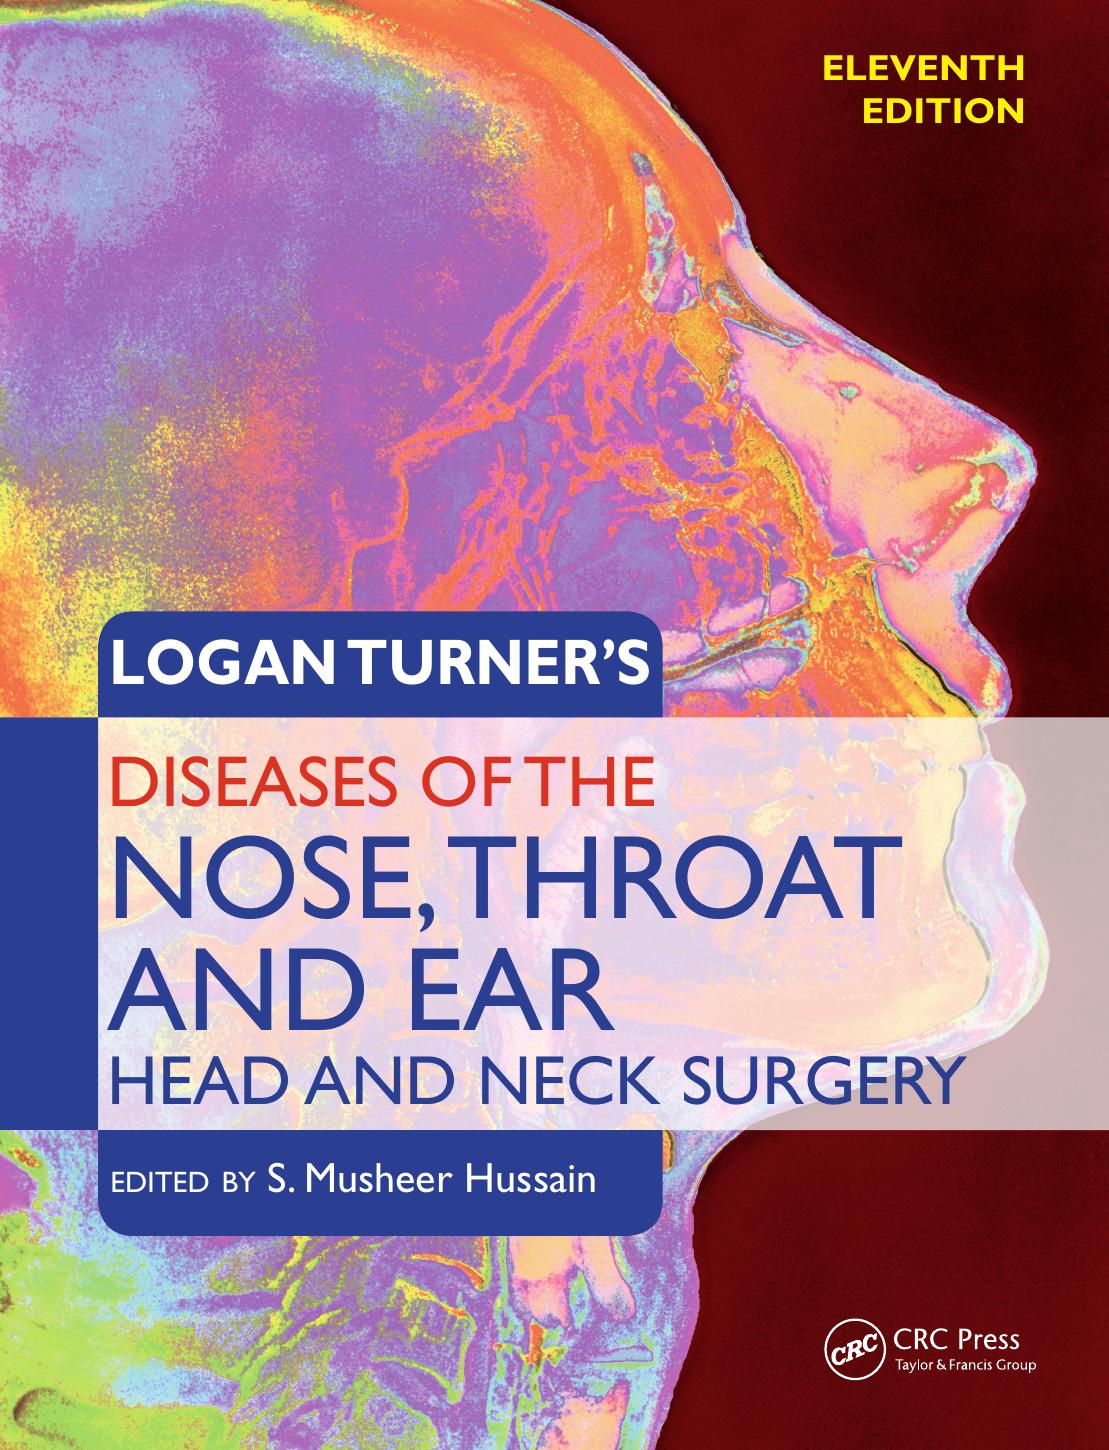 DISEASES OF THE NOSE, THROAT AND EAR: HEAD AND NECK SURGERY